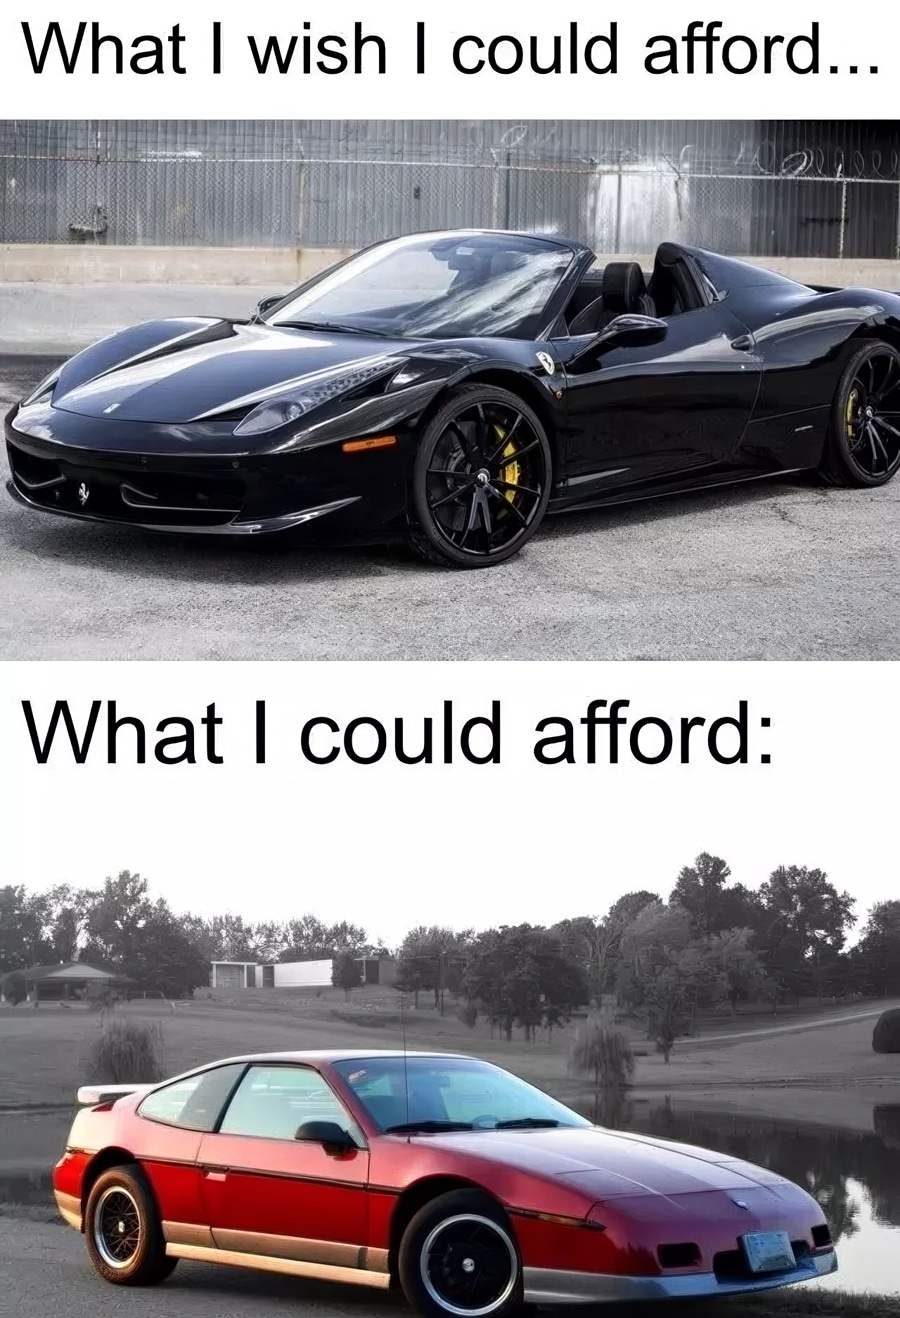 What I want vs what I can afford